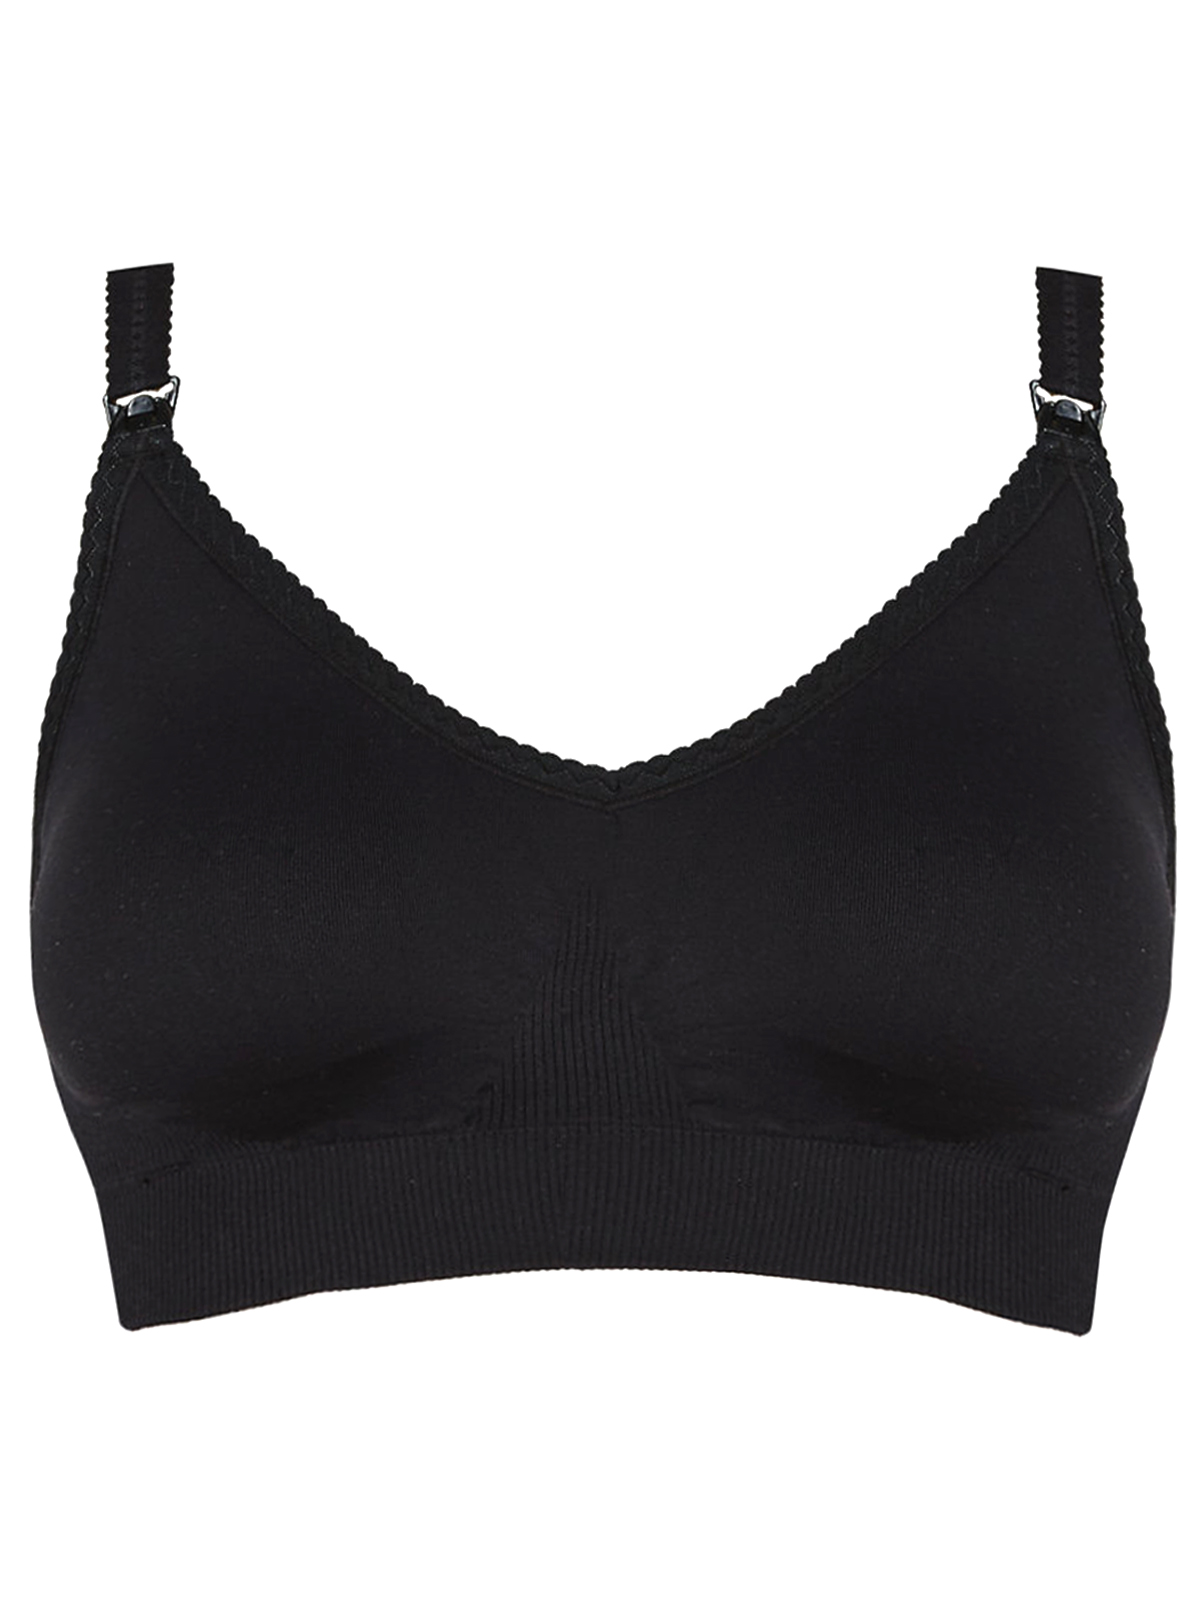 Marks and Spencer - - M&5 BLACK Maternity Seamfree Padded Full Cup Bra ...